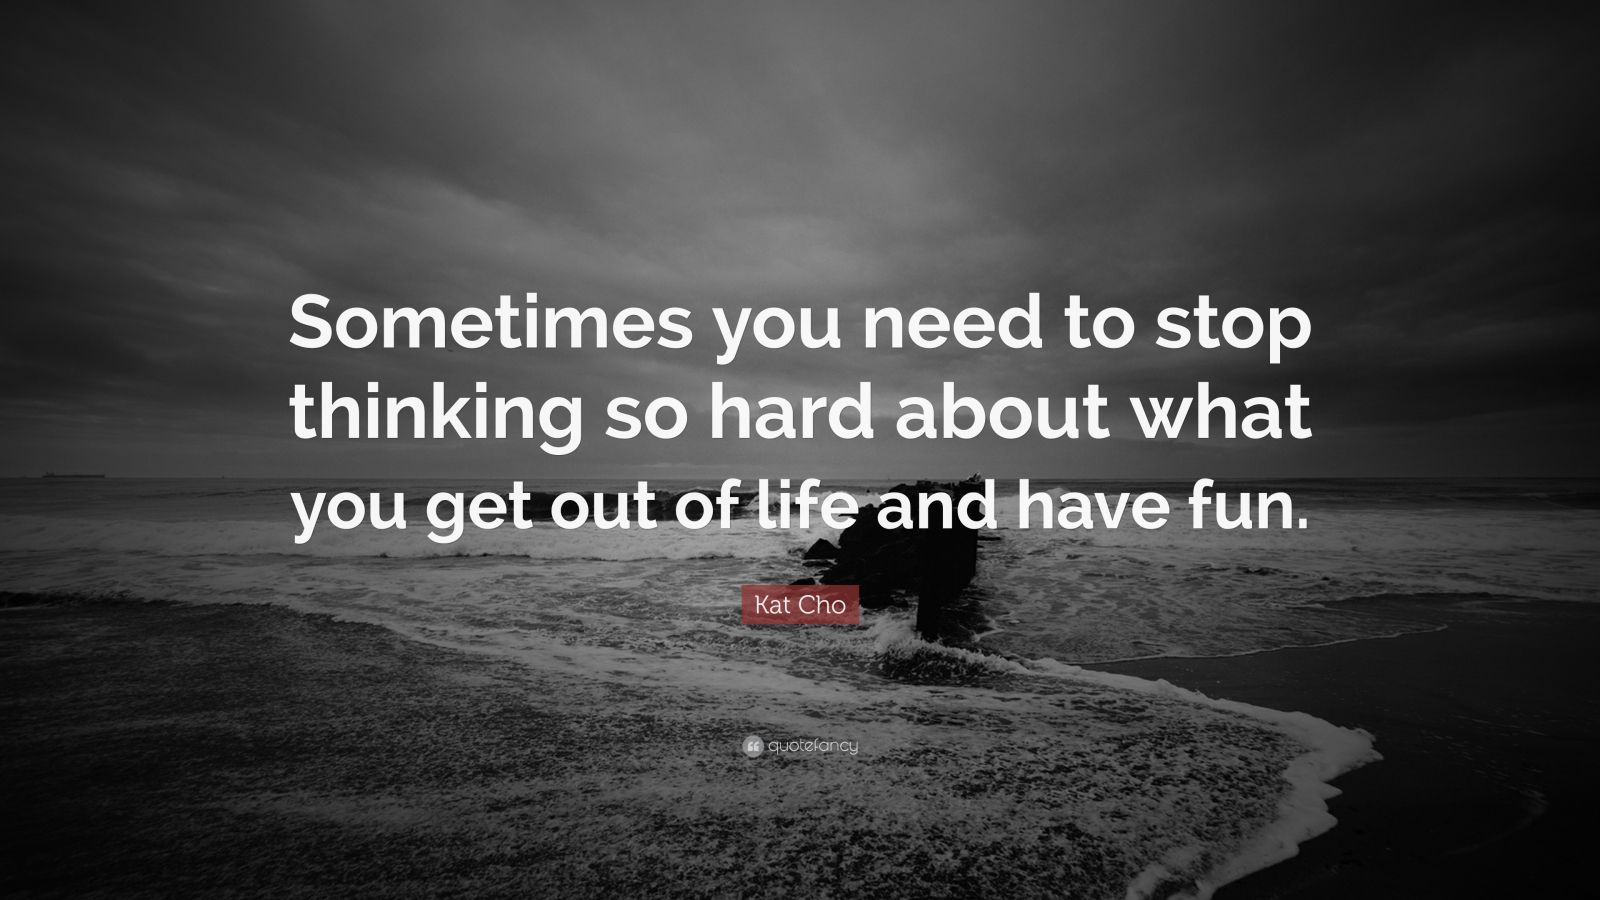 Kat Cho Quote “sometimes You Need To Stop Thinking So Hard About What You Get Out Of Life And 